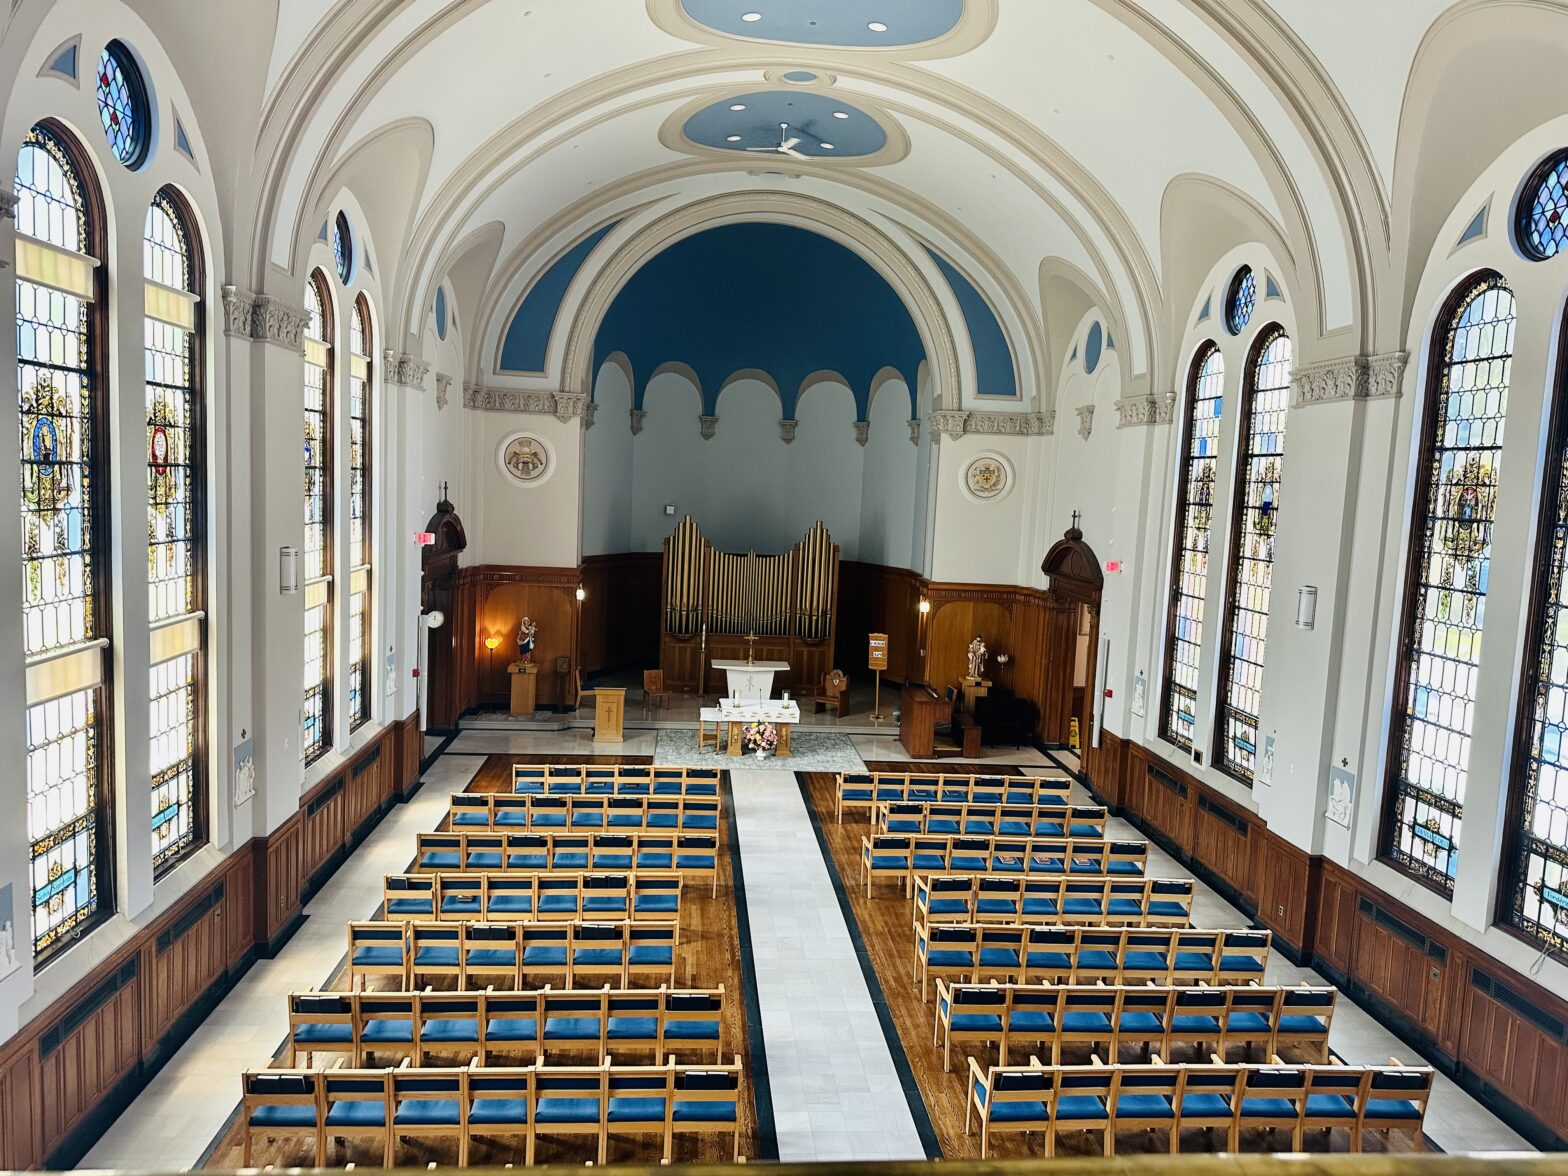 Du Lac Chapel, a church with rows of blue chairs.